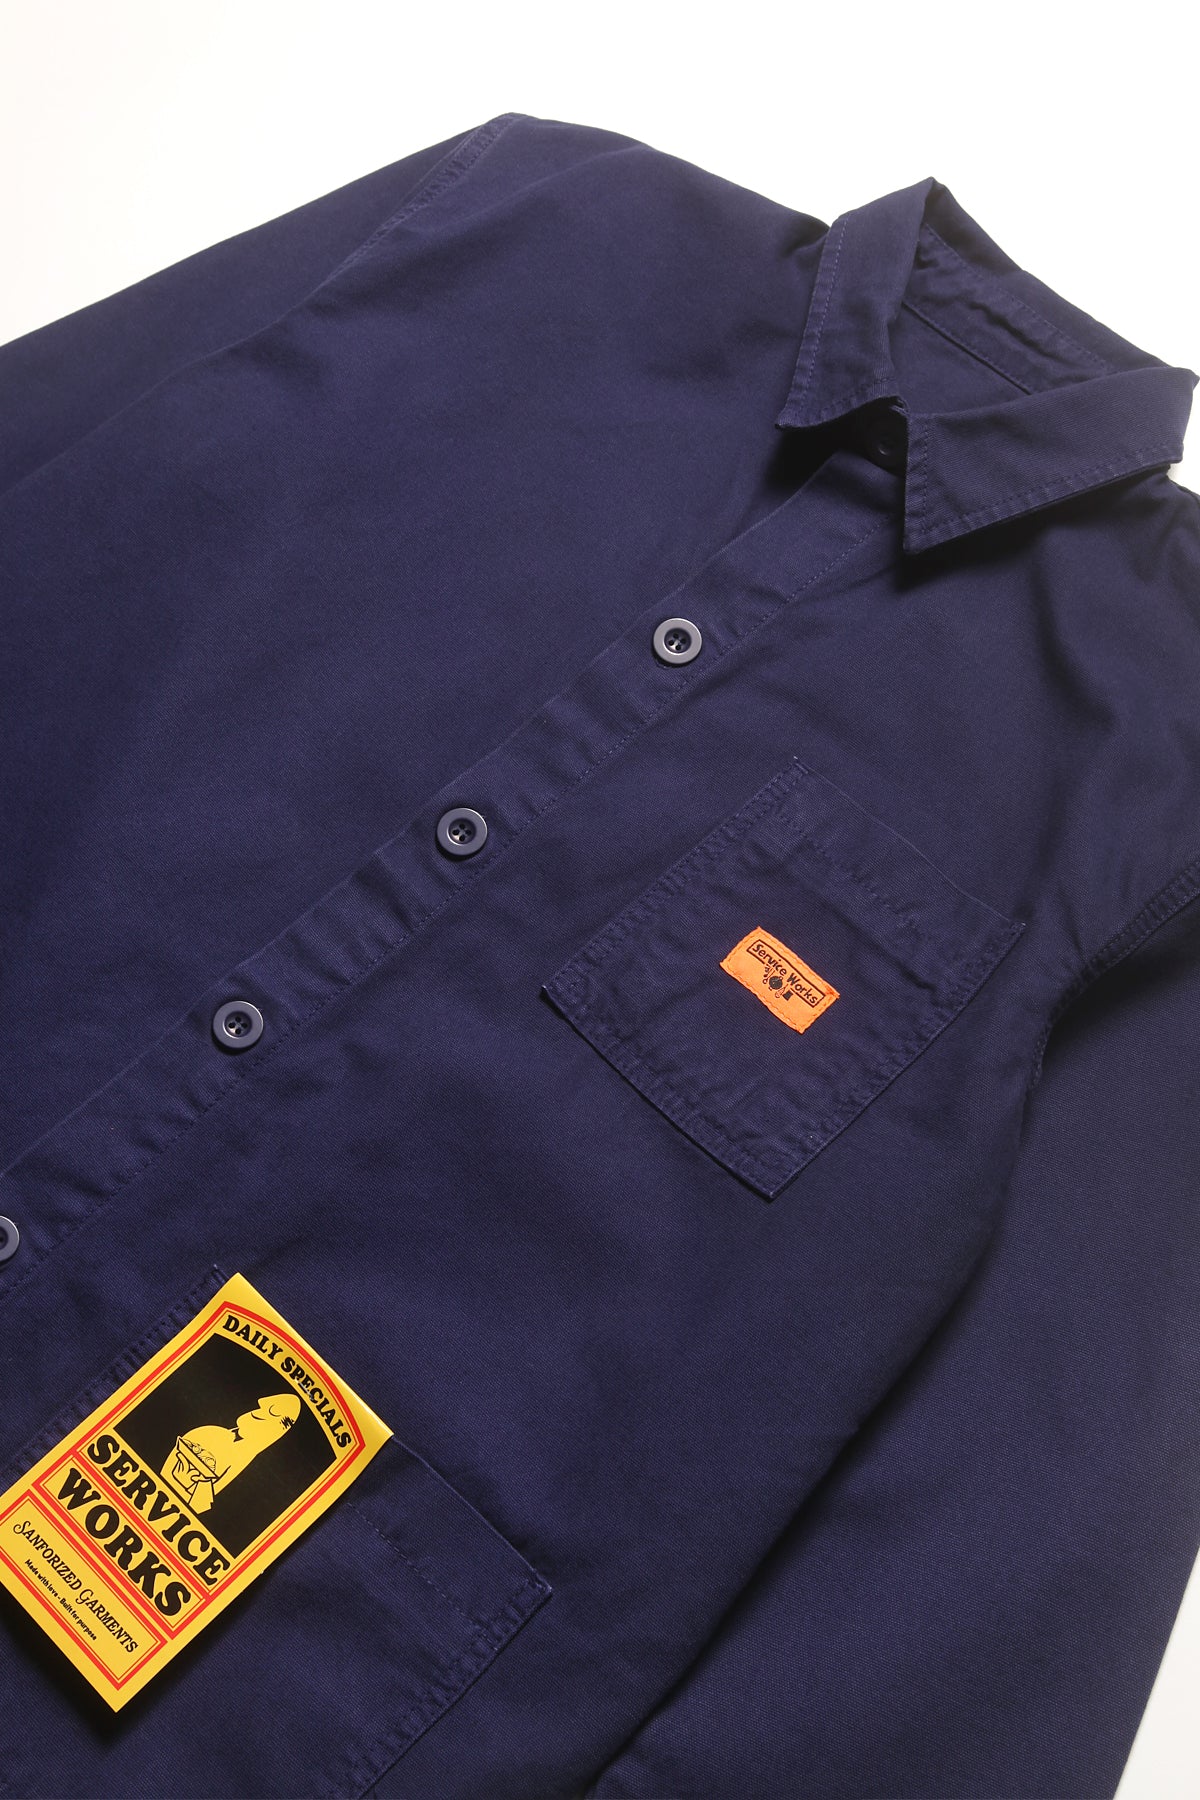 Service Works - Coverall Jacket - Navy